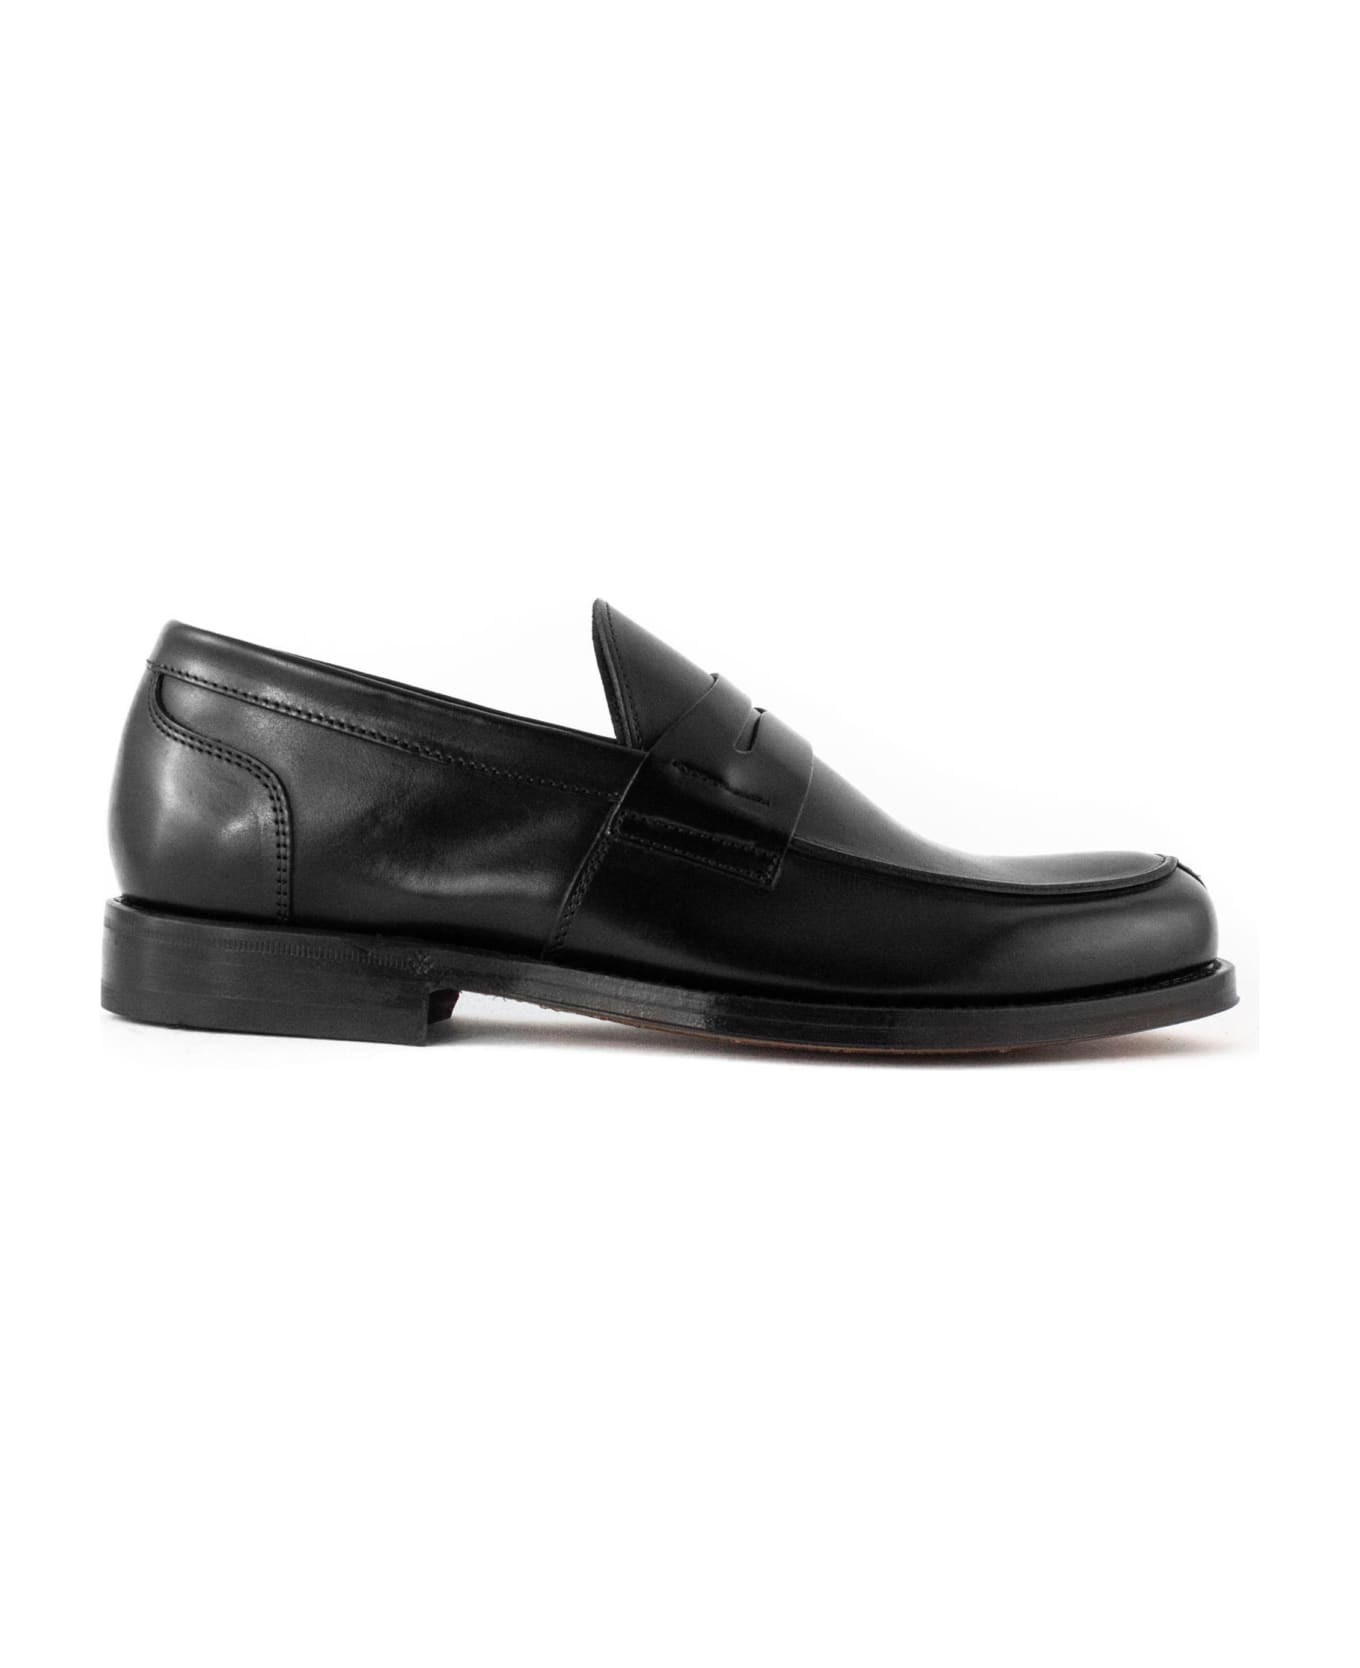 Green George Black Leather Loafer - Black ローファー＆デッキシューズ